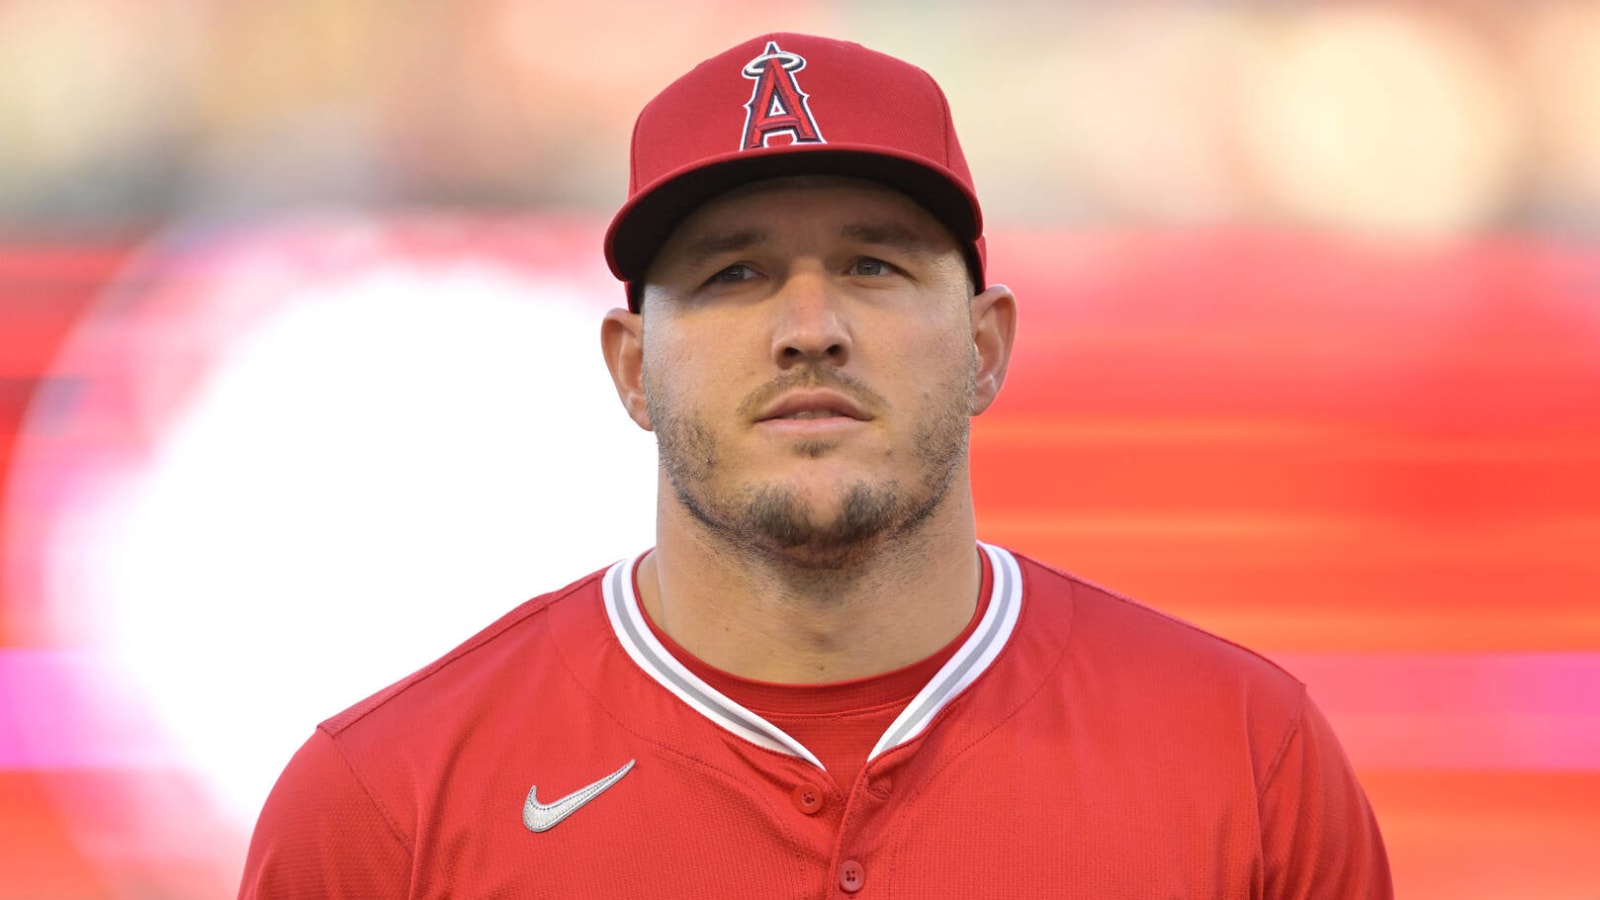 Angels superstar explains why he opted for knee surgery